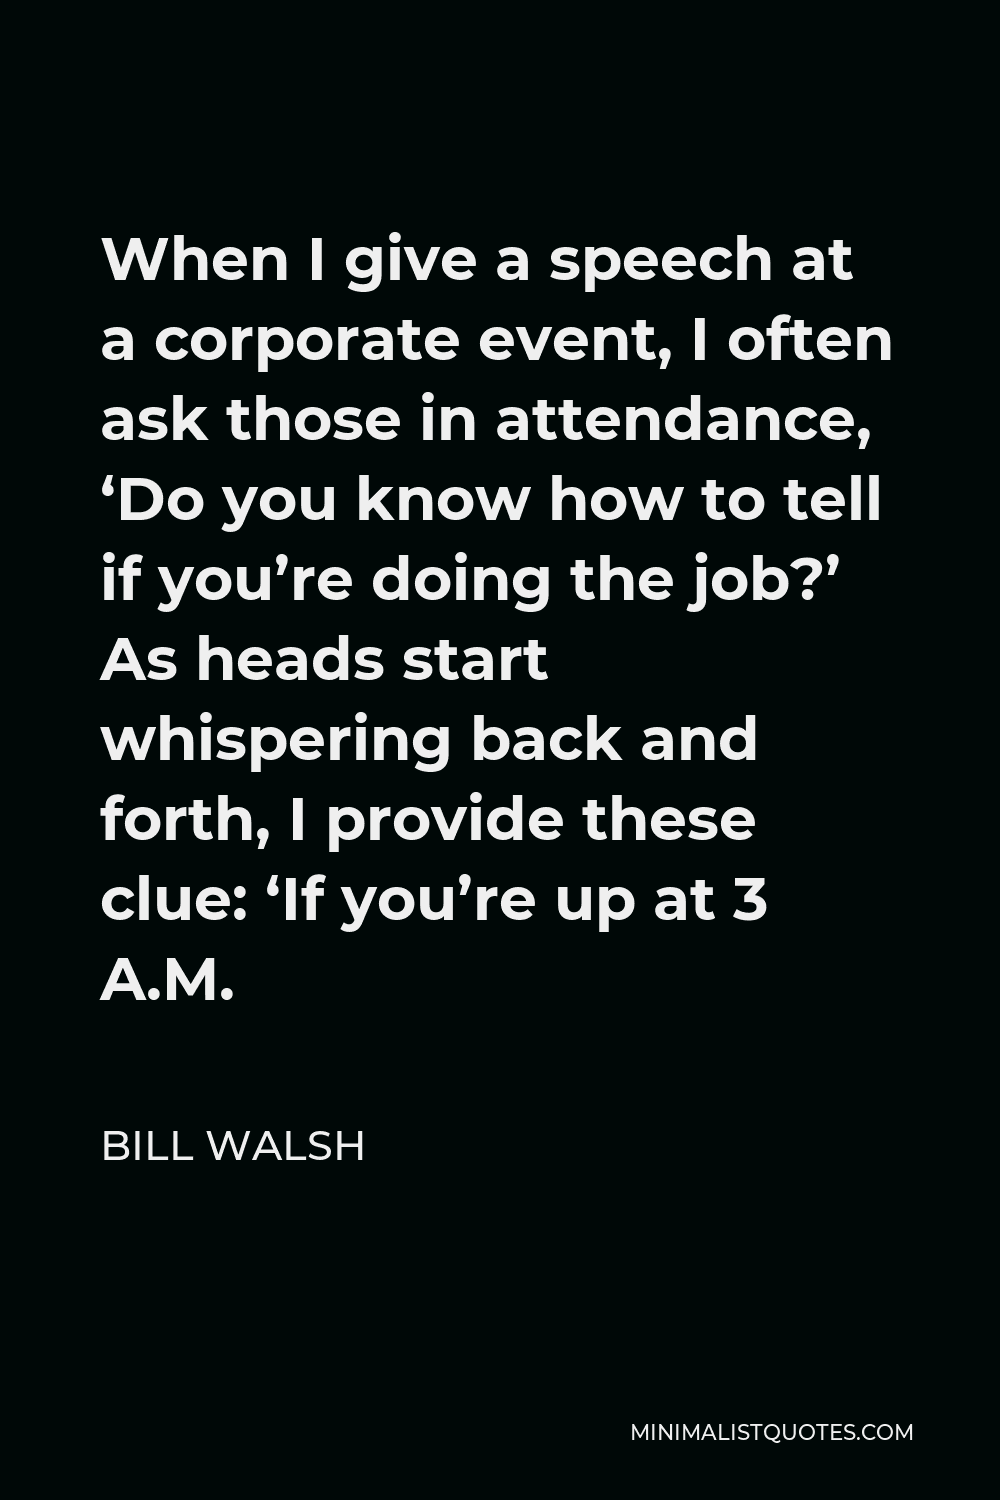 Bill Walsh Quote - When I give a speech at a corporate event, I often ask those in attendance, ‘Do you know how to tell if you’re doing the job?’ As heads start whispering back and forth, I provide these clue: ‘If you’re up at 3 A.M.